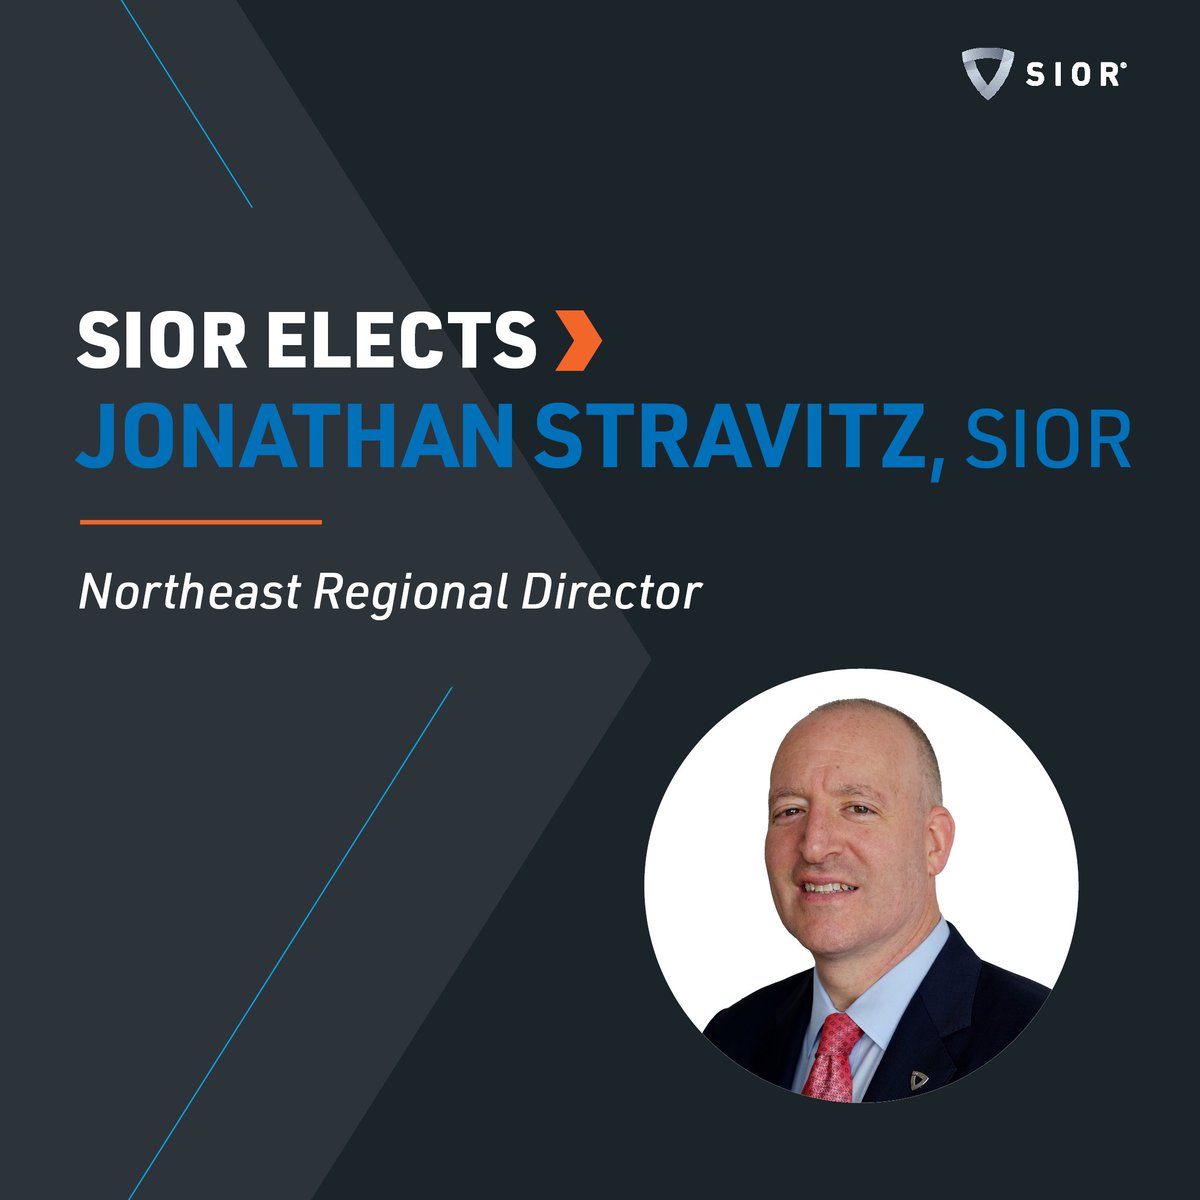 This spring, SIOR was honored to elect Jonathan Stravitz, SIOR, to serve as Northeast Regional Director! With a J.D. focused in #CRE, Jonathan's professionalism combined with his corporate & legal knowledge will make him indispensable to his role as a leader to his region.